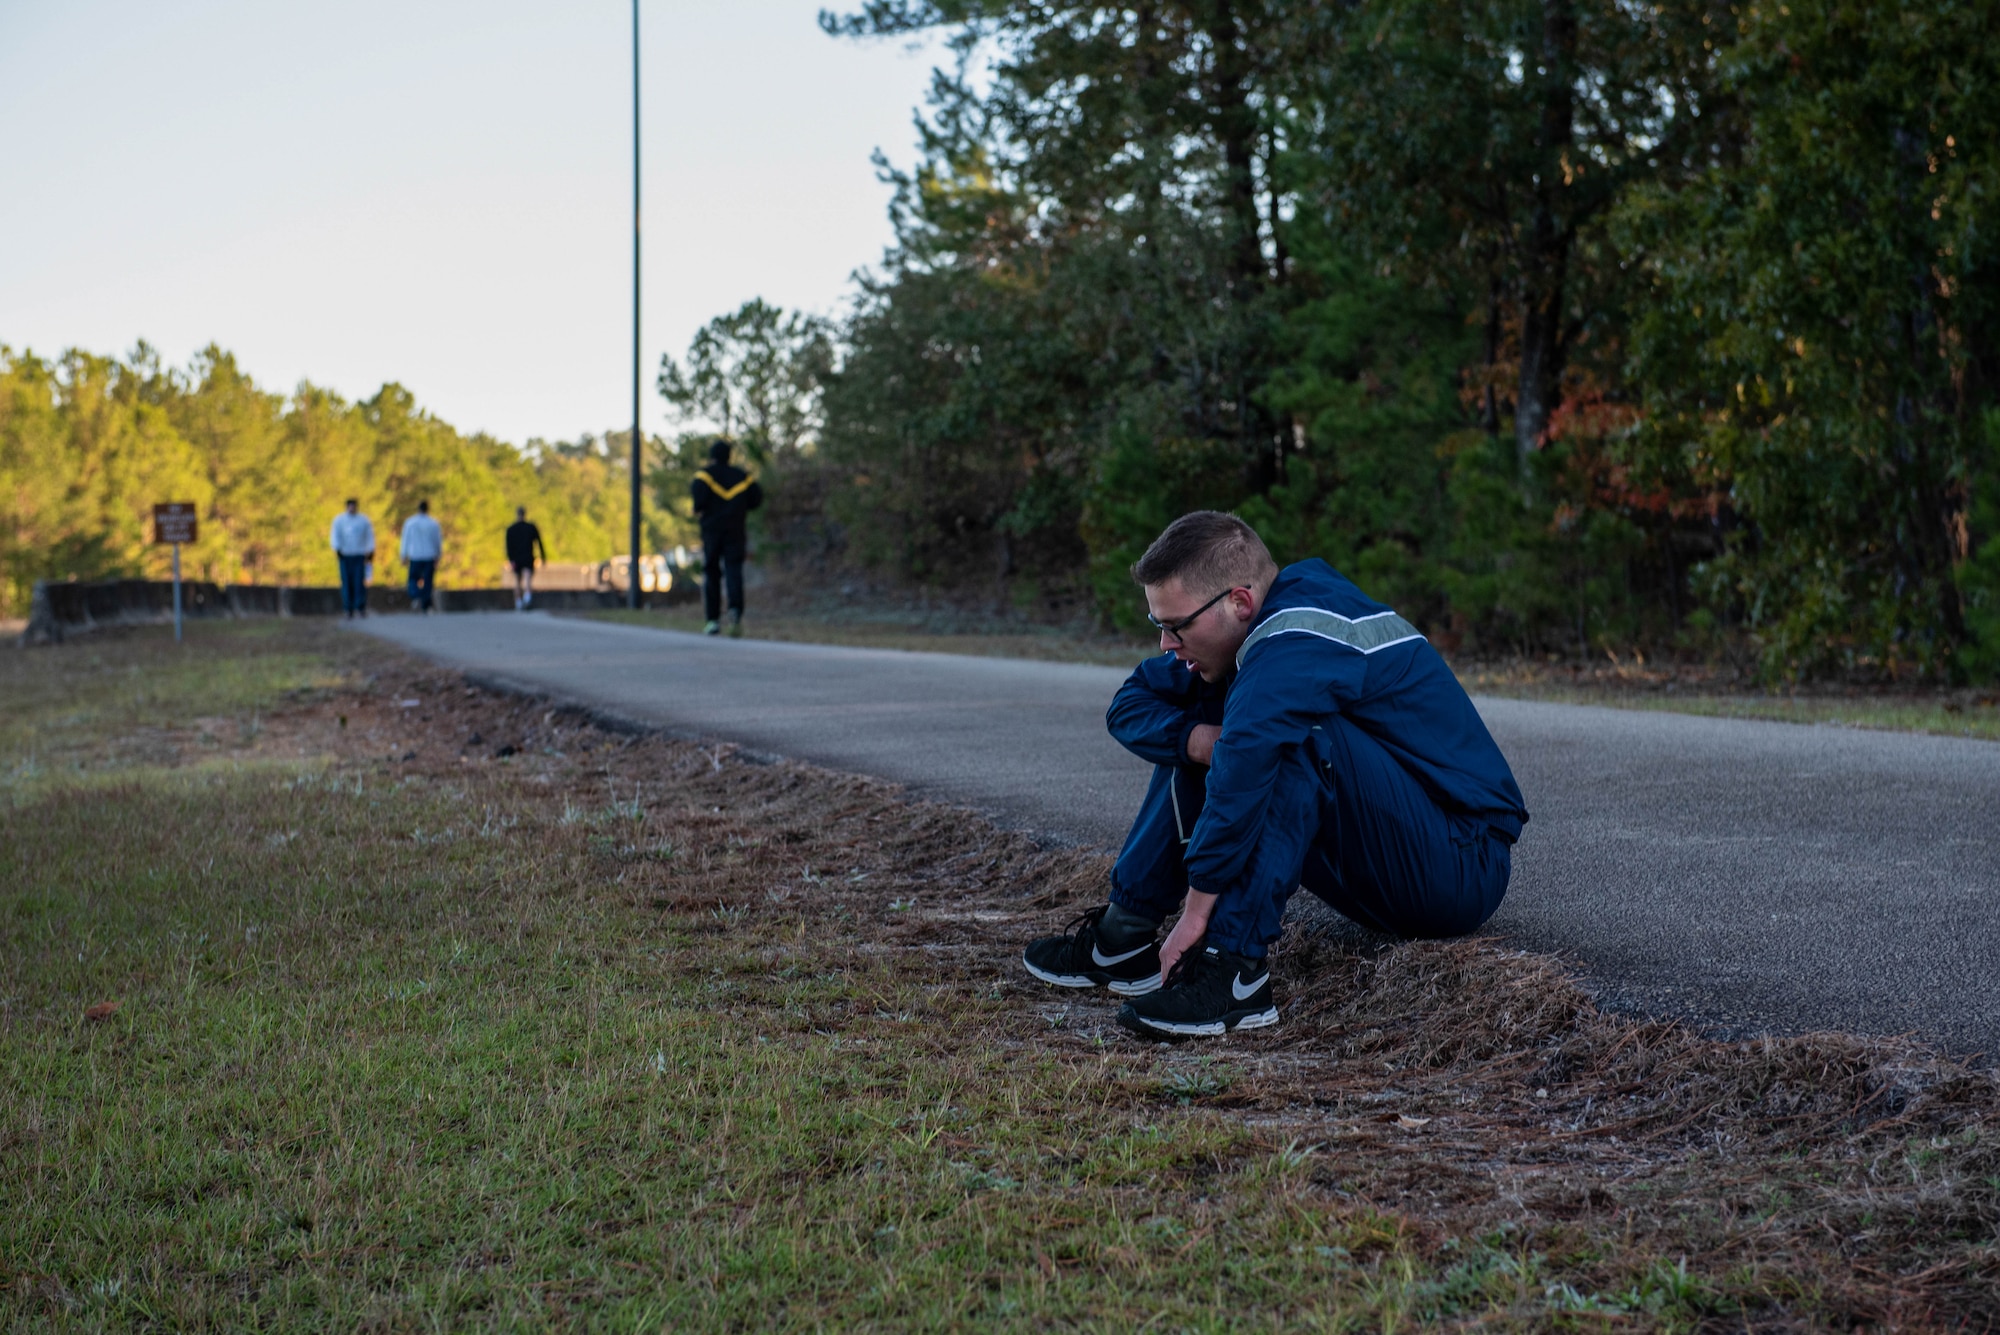 A U.S. Airman sits on the edge of the track after a 1000-meter sprint at the McCrady Training Center in Eastover, South Carolina, Nov. 9, 2019.